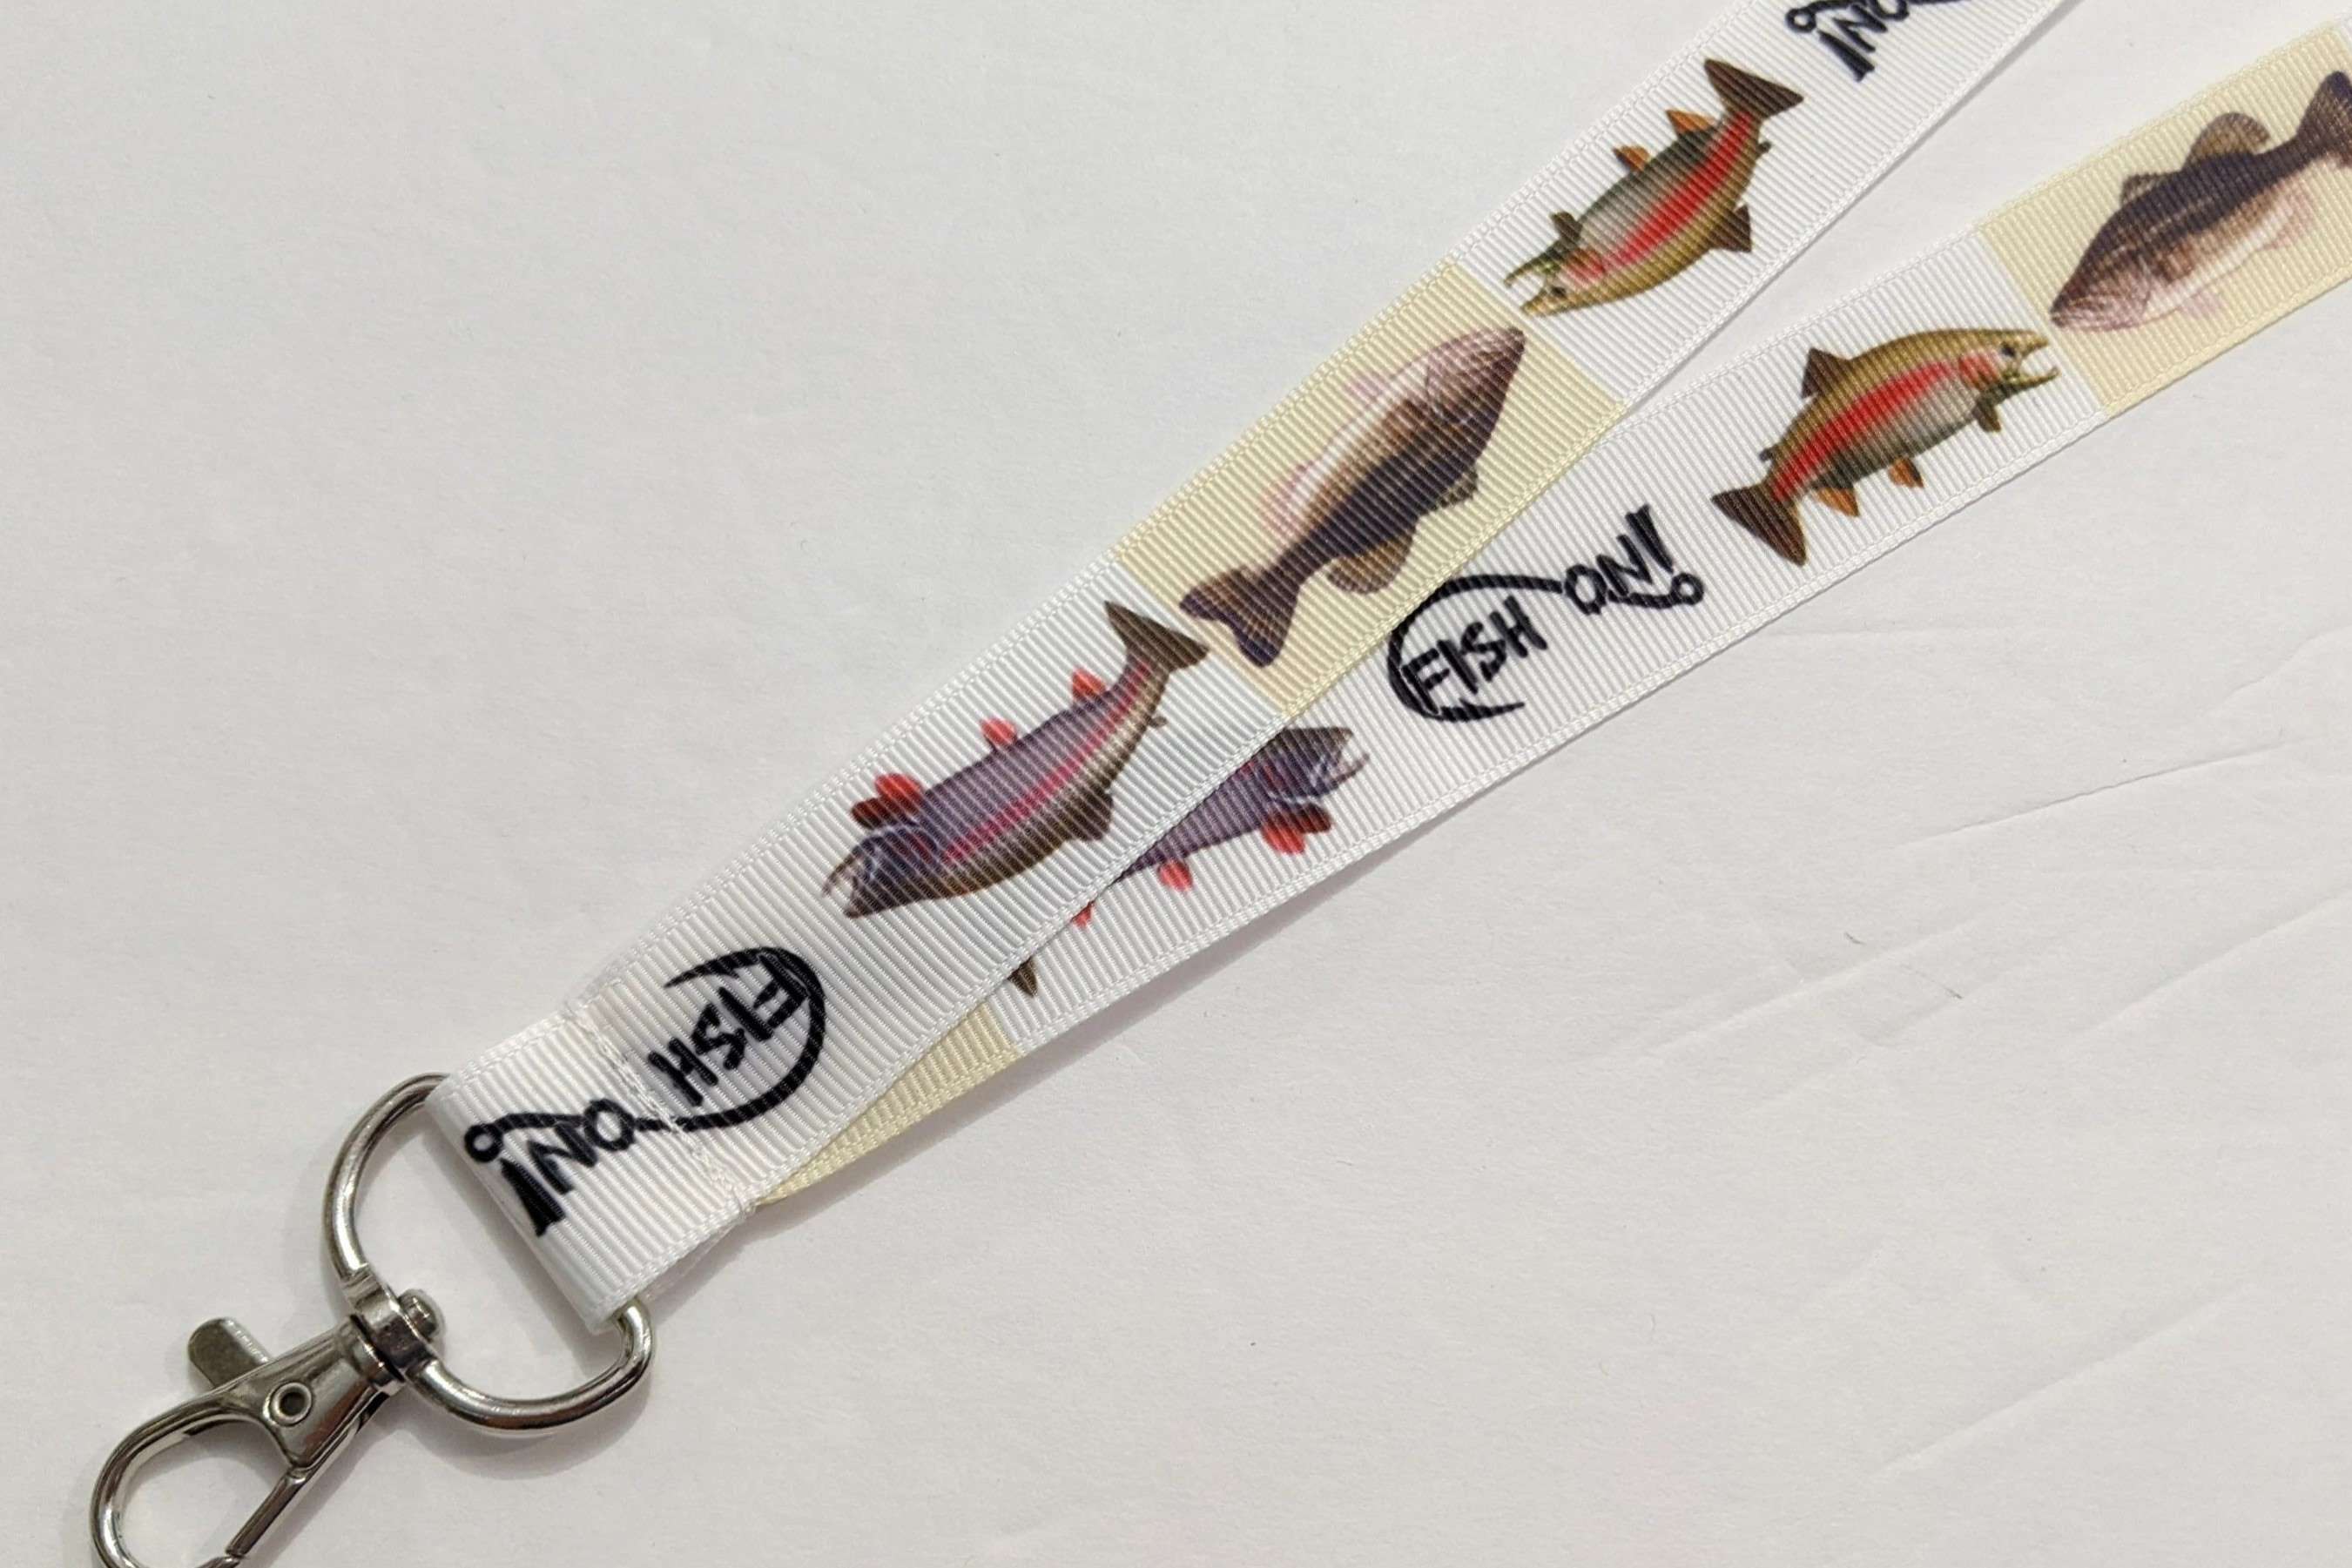 Nautical Crafting: Creating A Lanyard With A Fish Theme